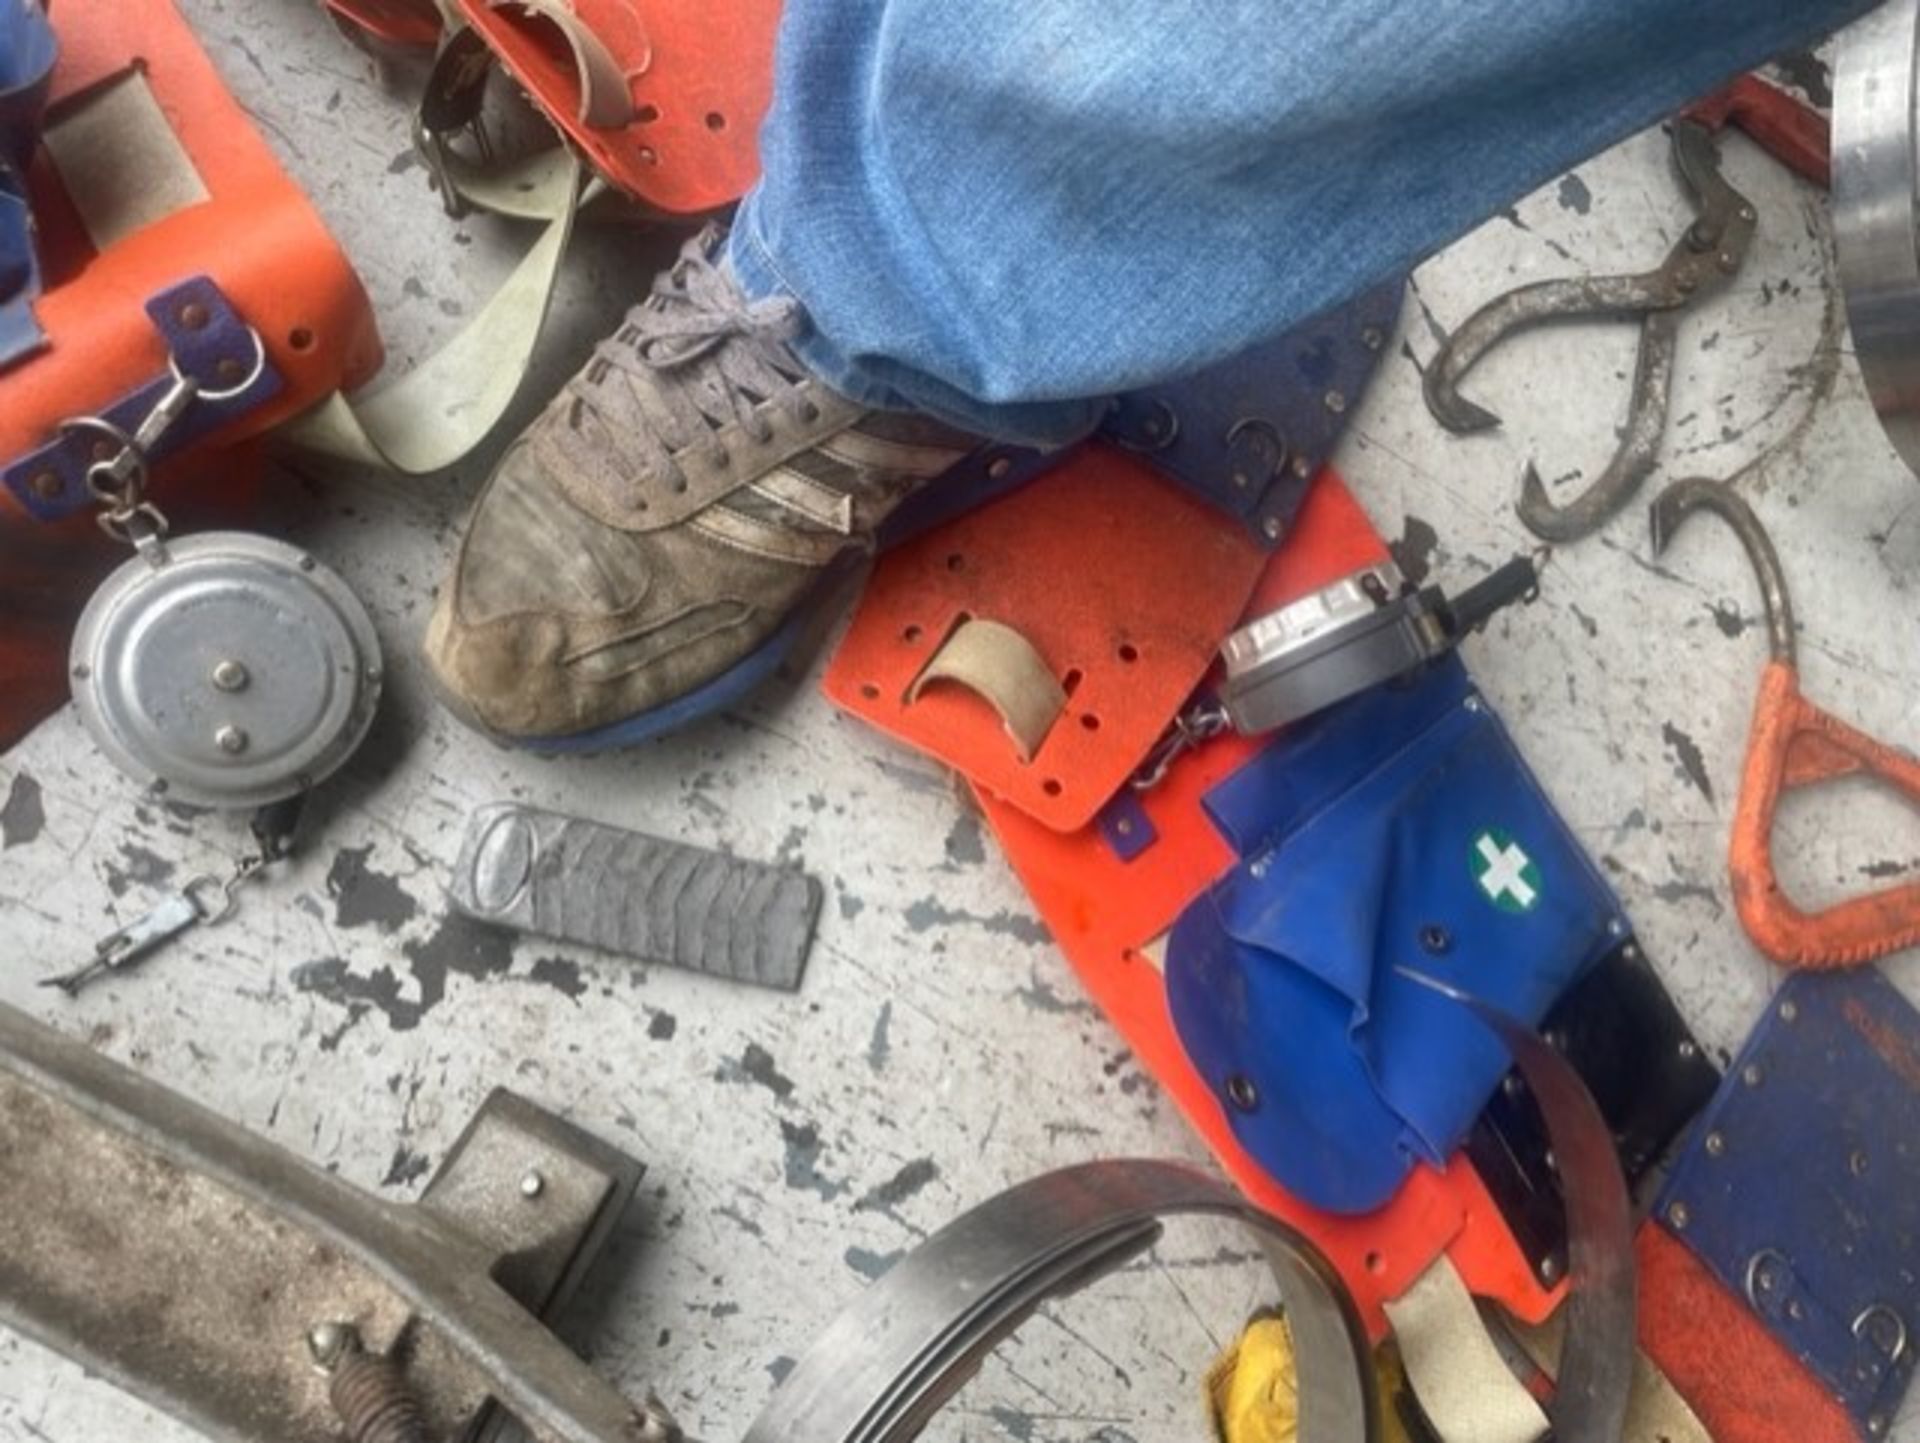 Tree surgeons tools forsips tapes wedges tool belts and climbing feet - Image 5 of 6